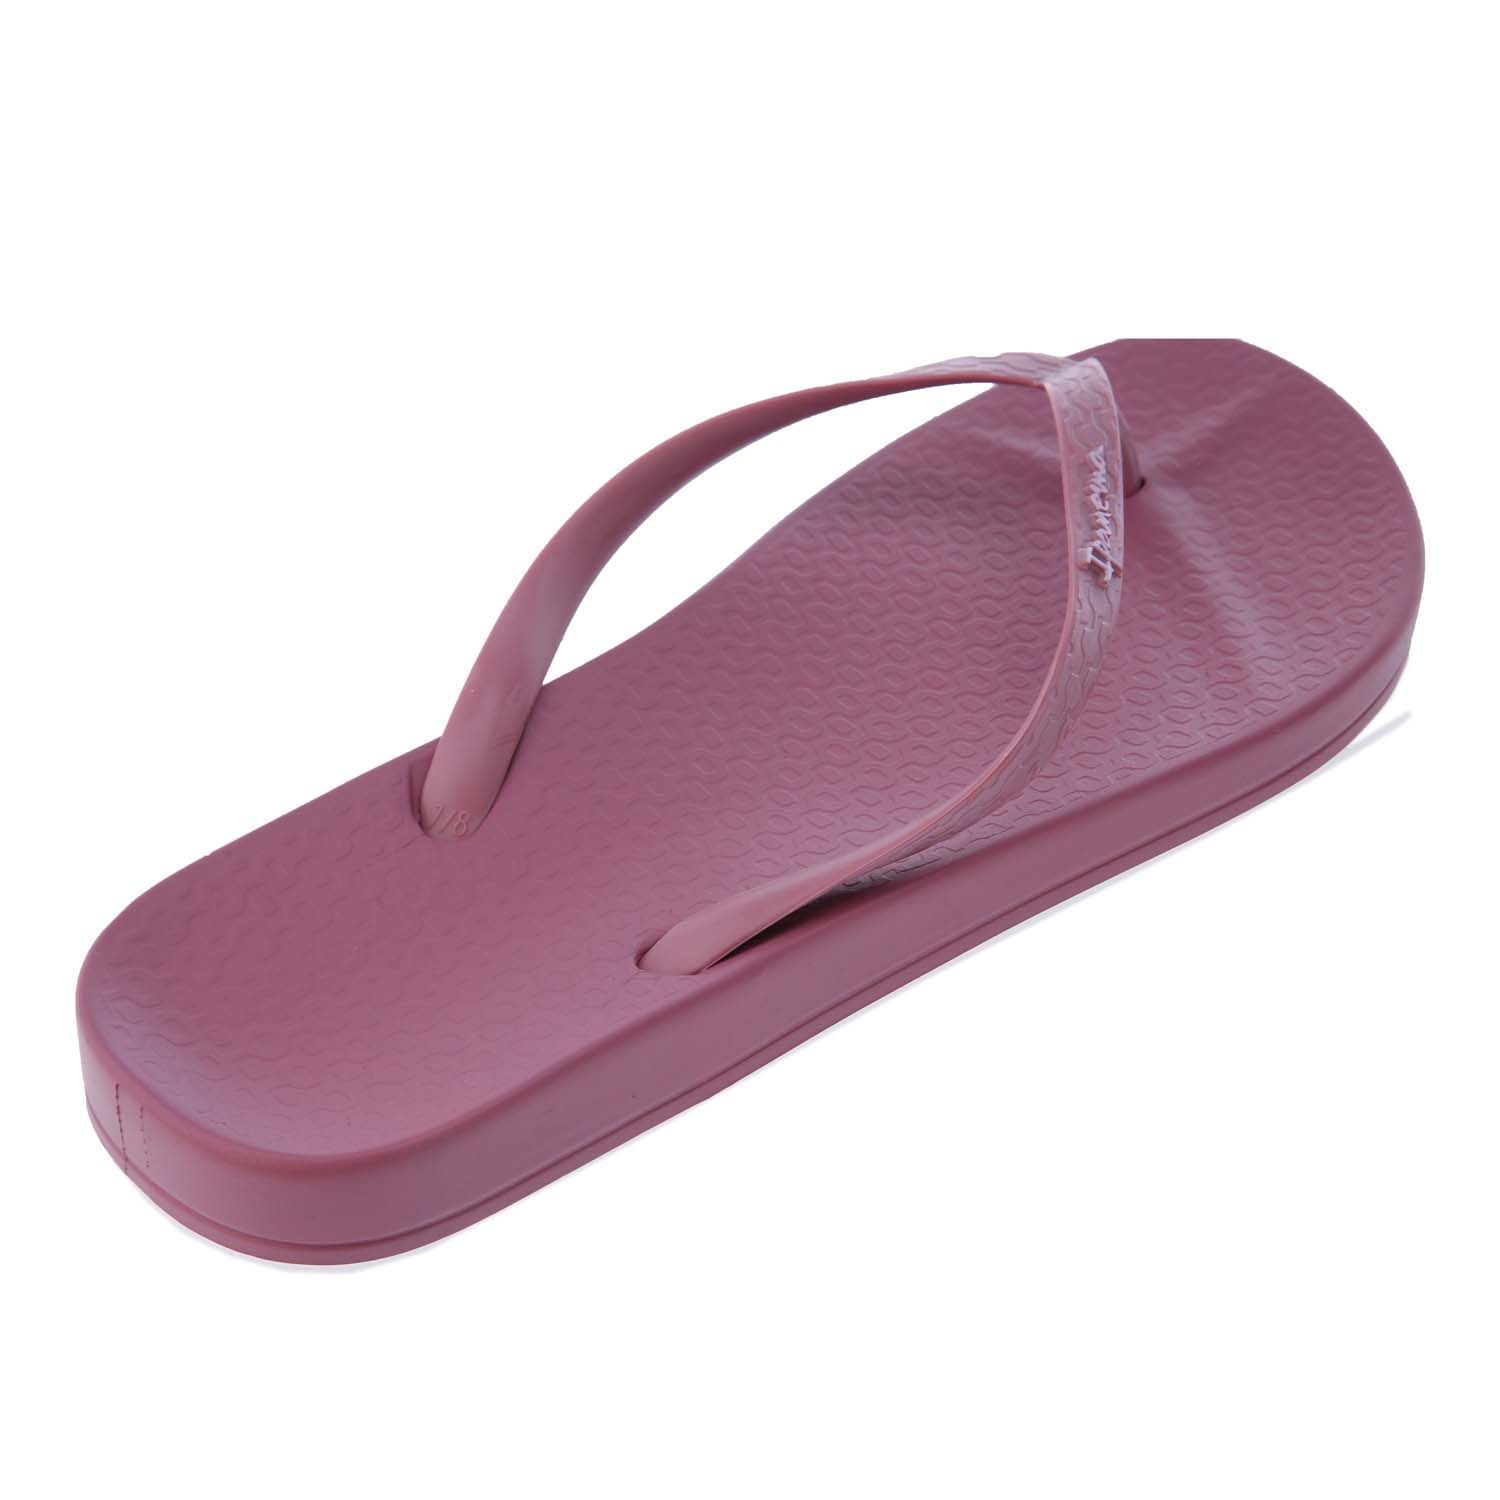 Womens Ipanema Anatomica Colours Flip Flops in berry.- Synthetic upper.- Slip-on design.- V-shaped straps.- Logo detail.- Toe post.- Anatomic footbed.  - Rubber sole.- Synthetic upper  lining and sole.- Ref: 8259122651